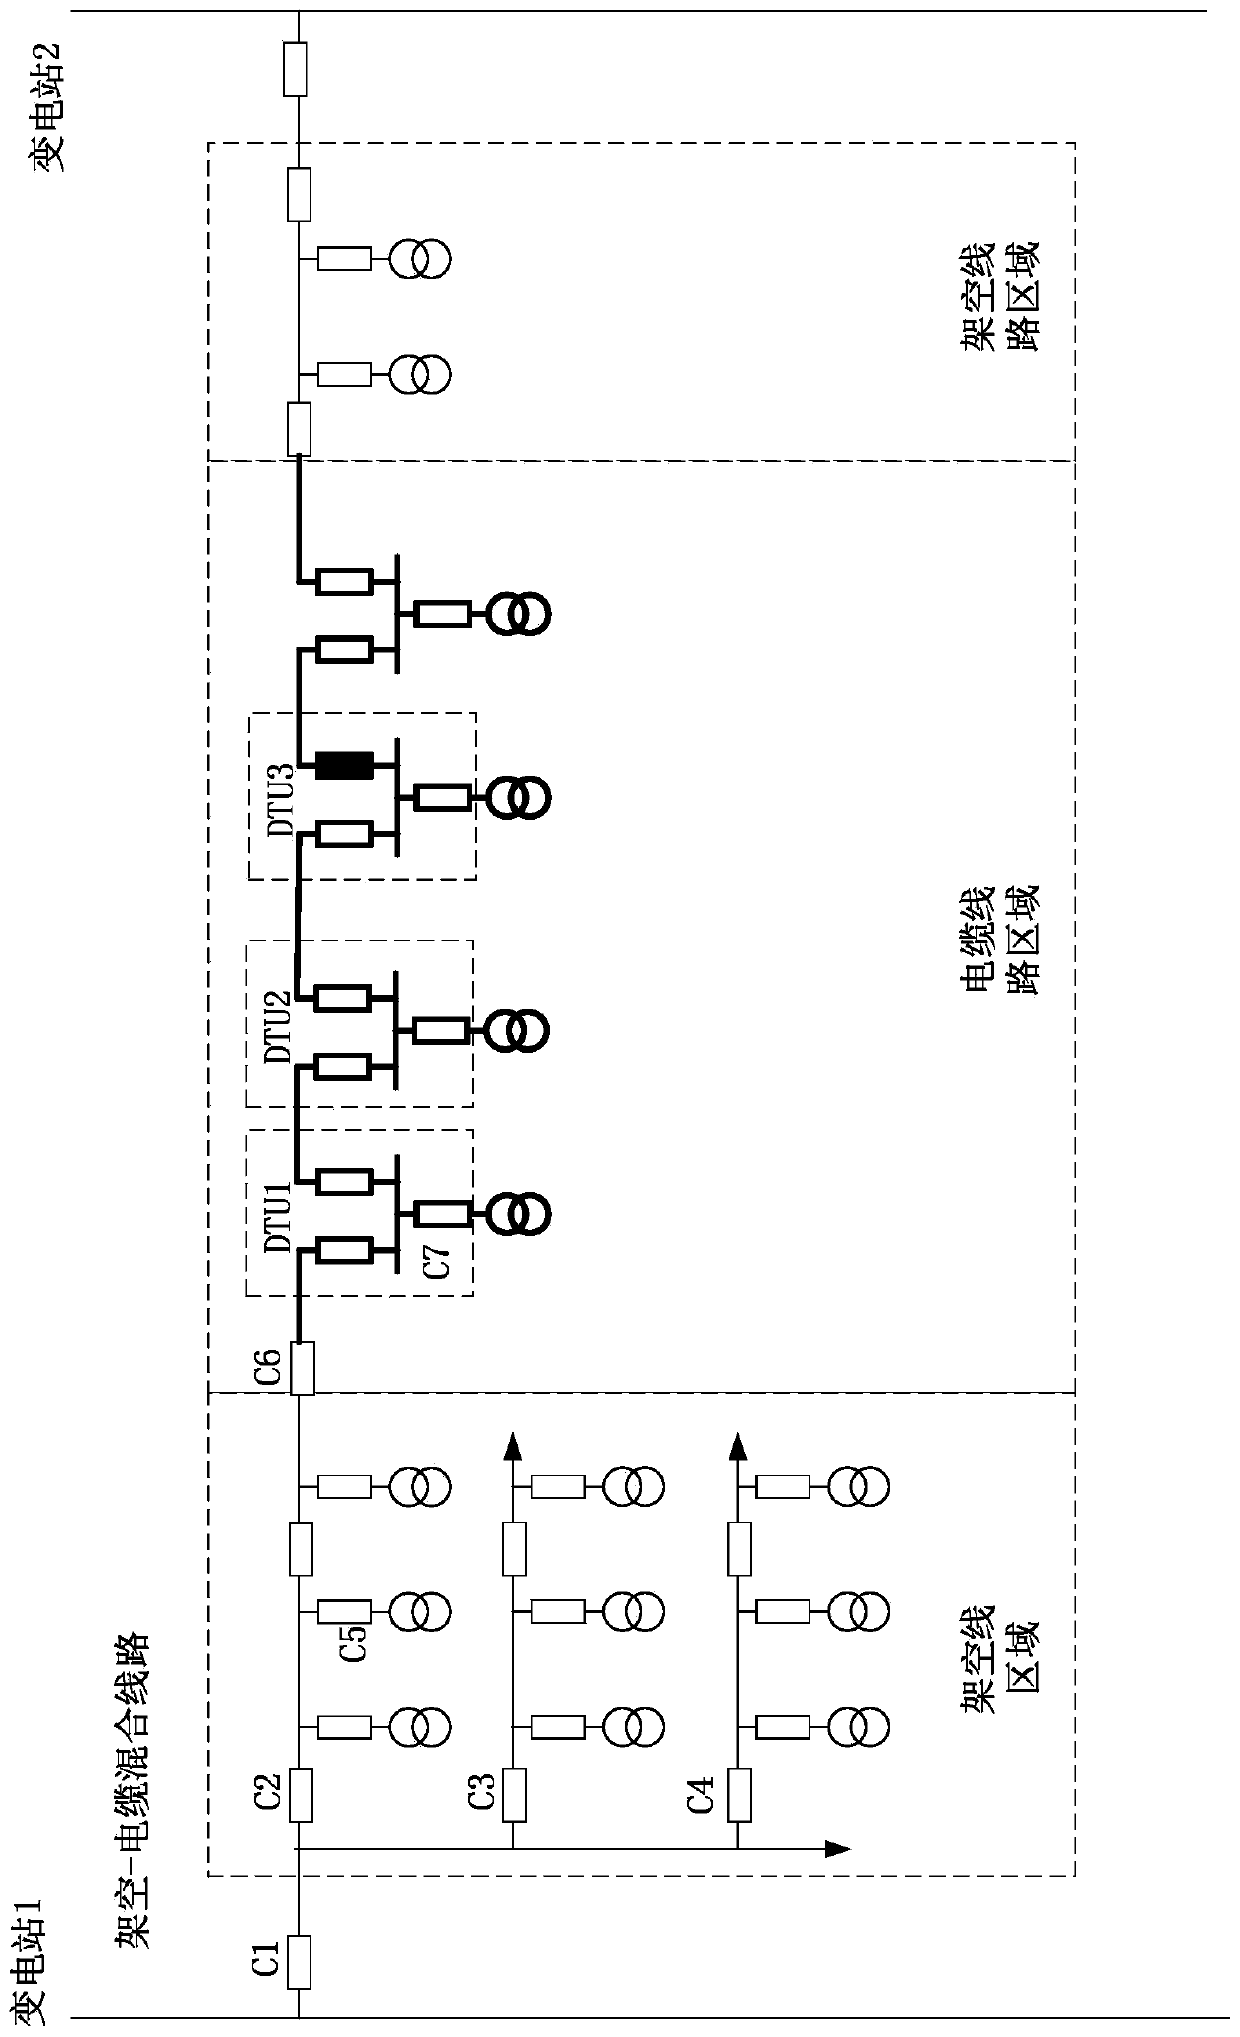 Fault processing method and system for overhead-cable hybrid line